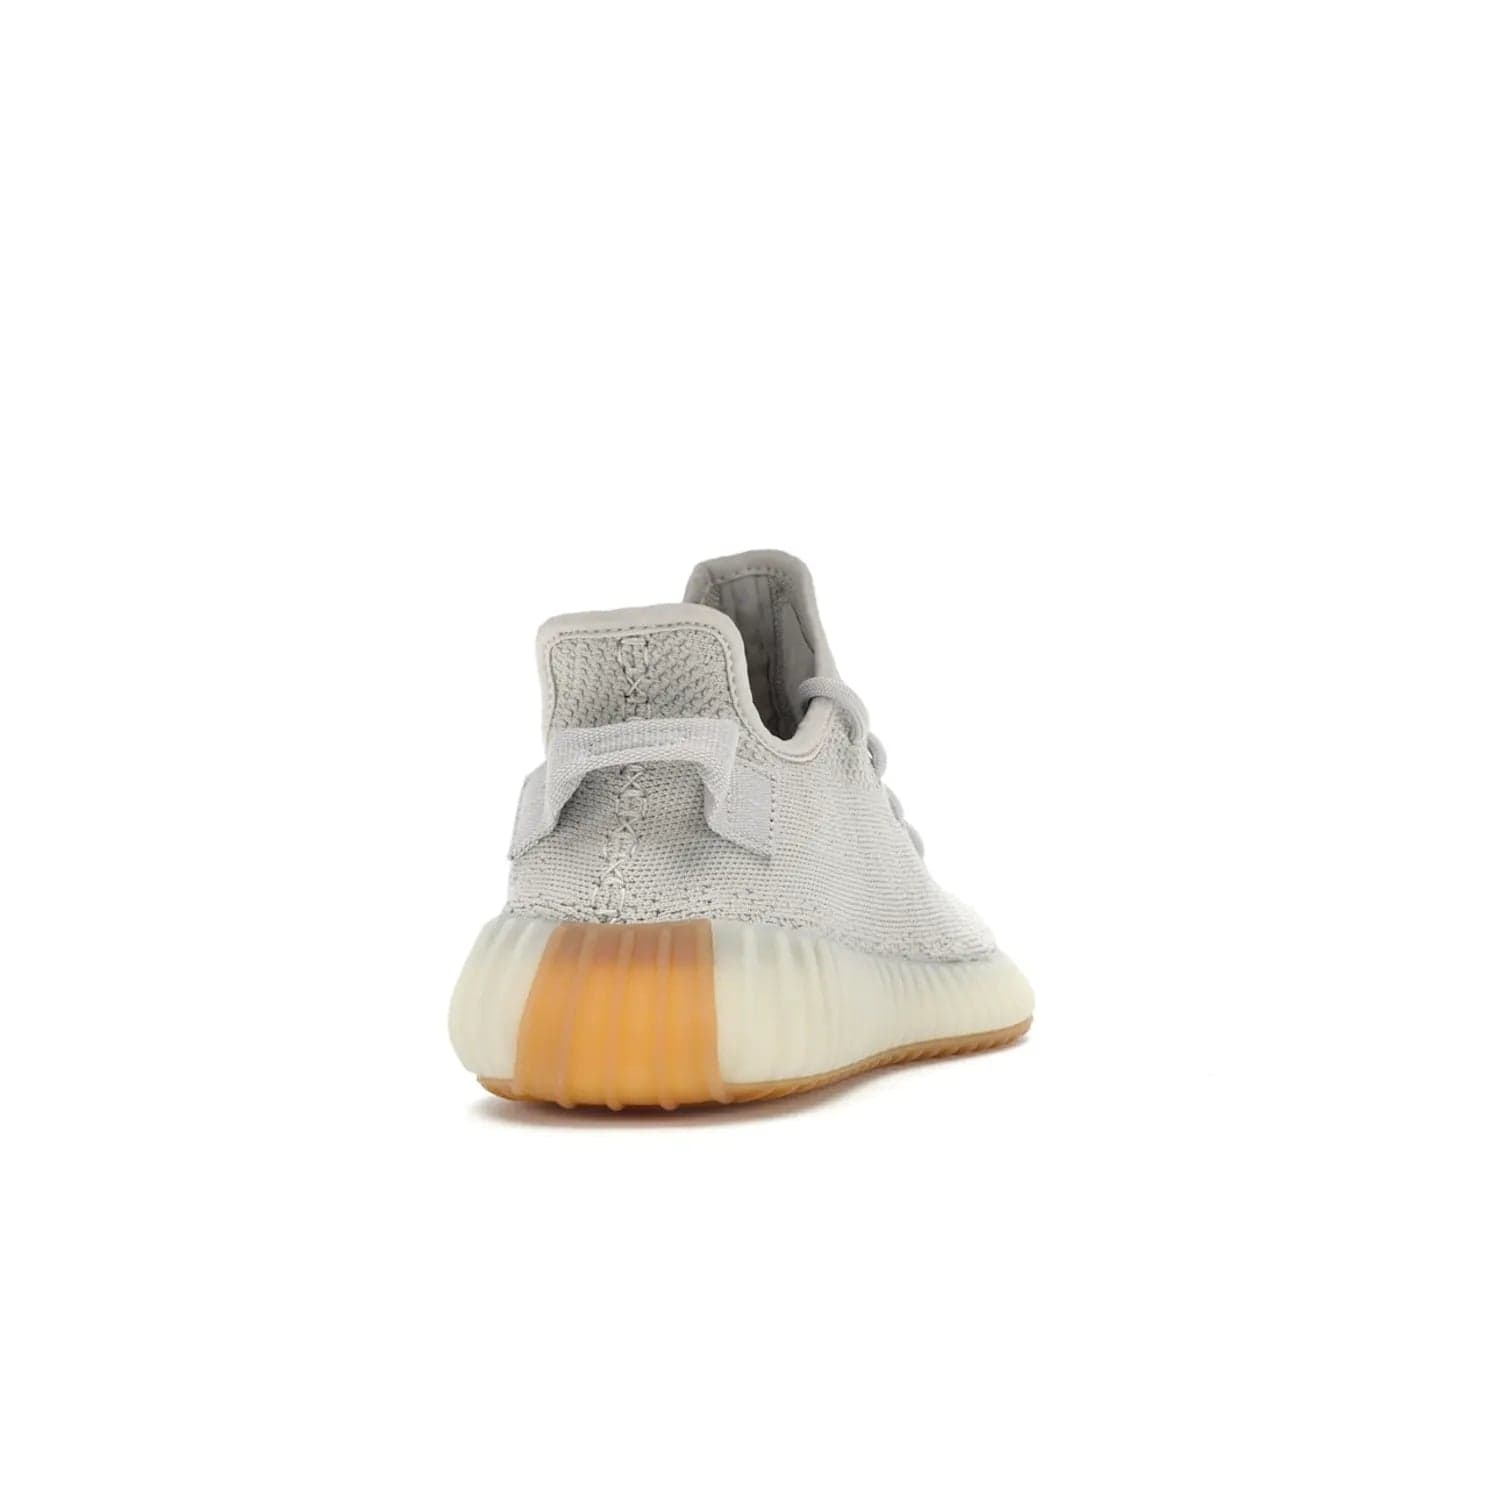 adidas Yeezy Boost 350 V2 Sesame - Image 30 - Only at www.BallersClubKickz.com - Introducing the adidas Yeezy Boost 350 V2 Sesame. Featuring a sesame upper, midsole and gum sole for a sleek silhouette. Cop the stylish sneaker released in November 2018.